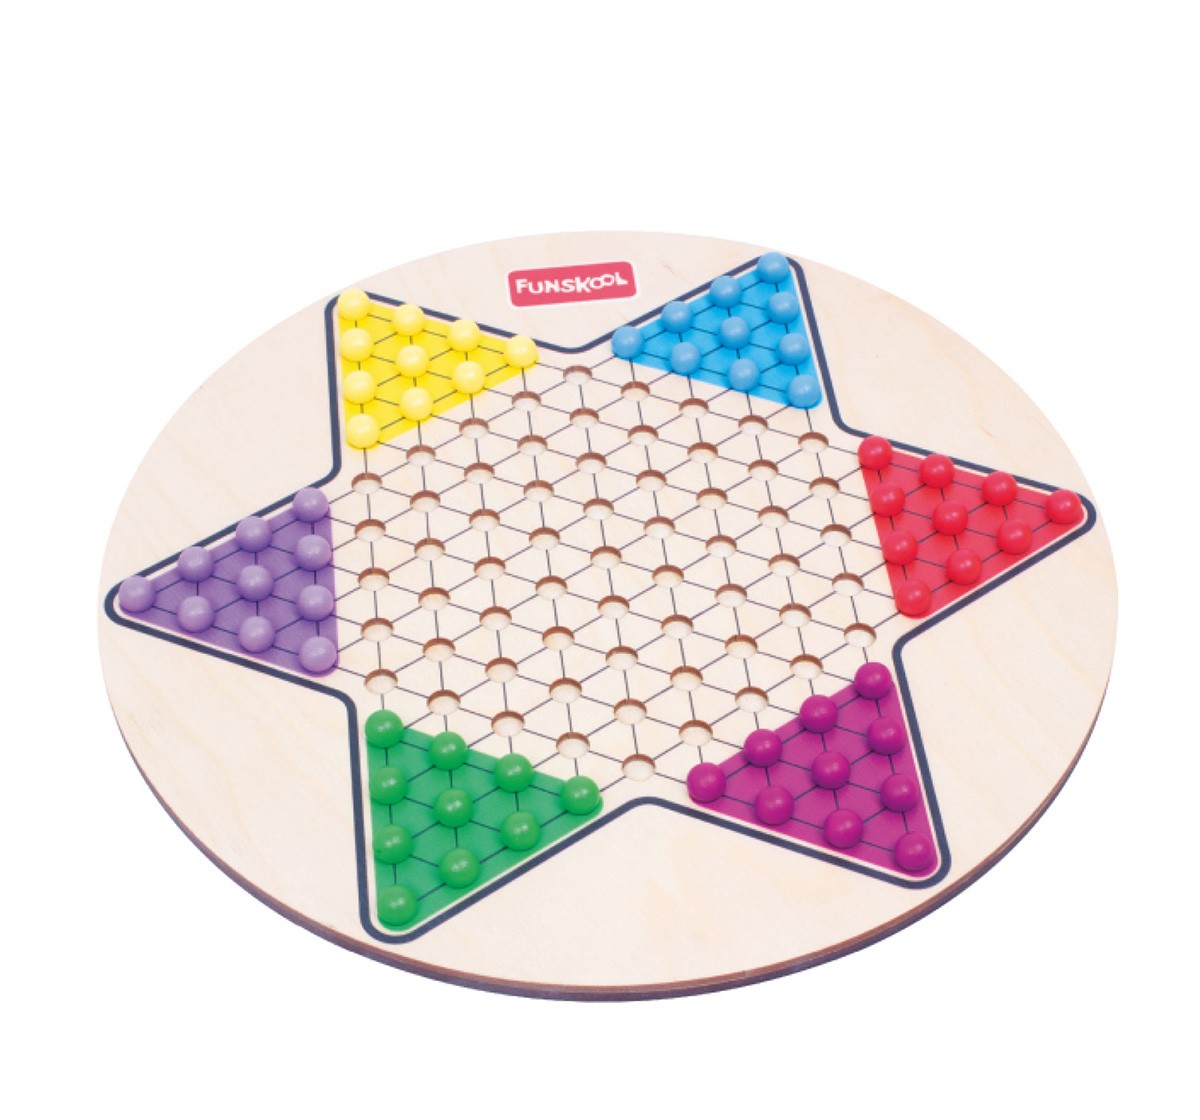 Funskool Deluxe Chinese Checkers "Folktale Toys", 6Y+